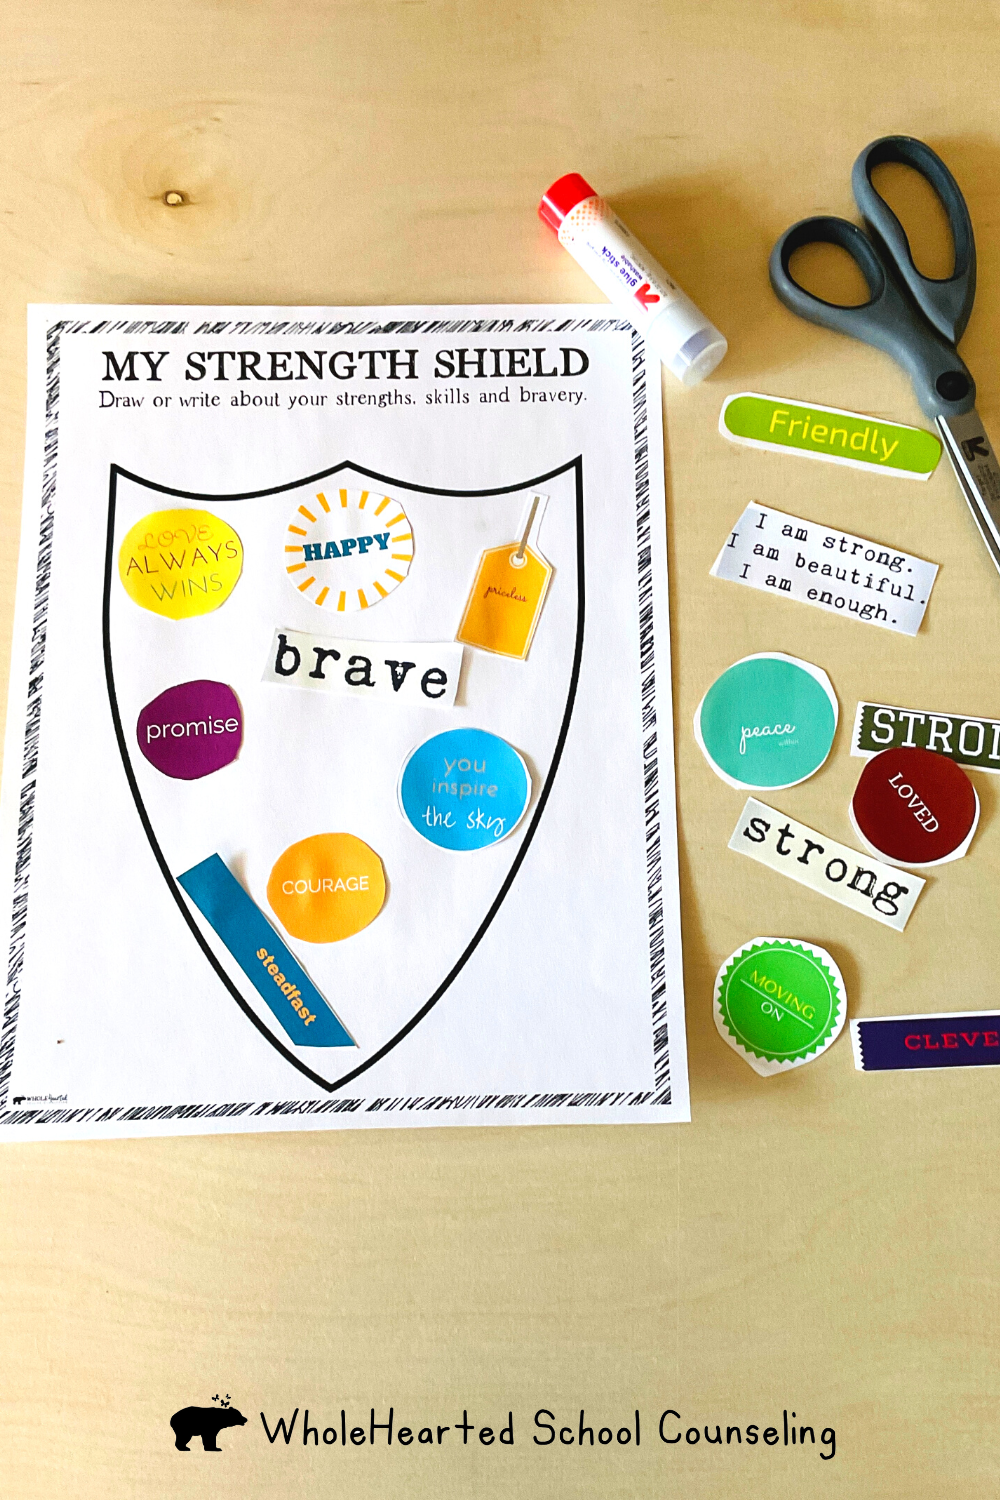 Strength Shield Solution Focused Brief Counseling with Kids